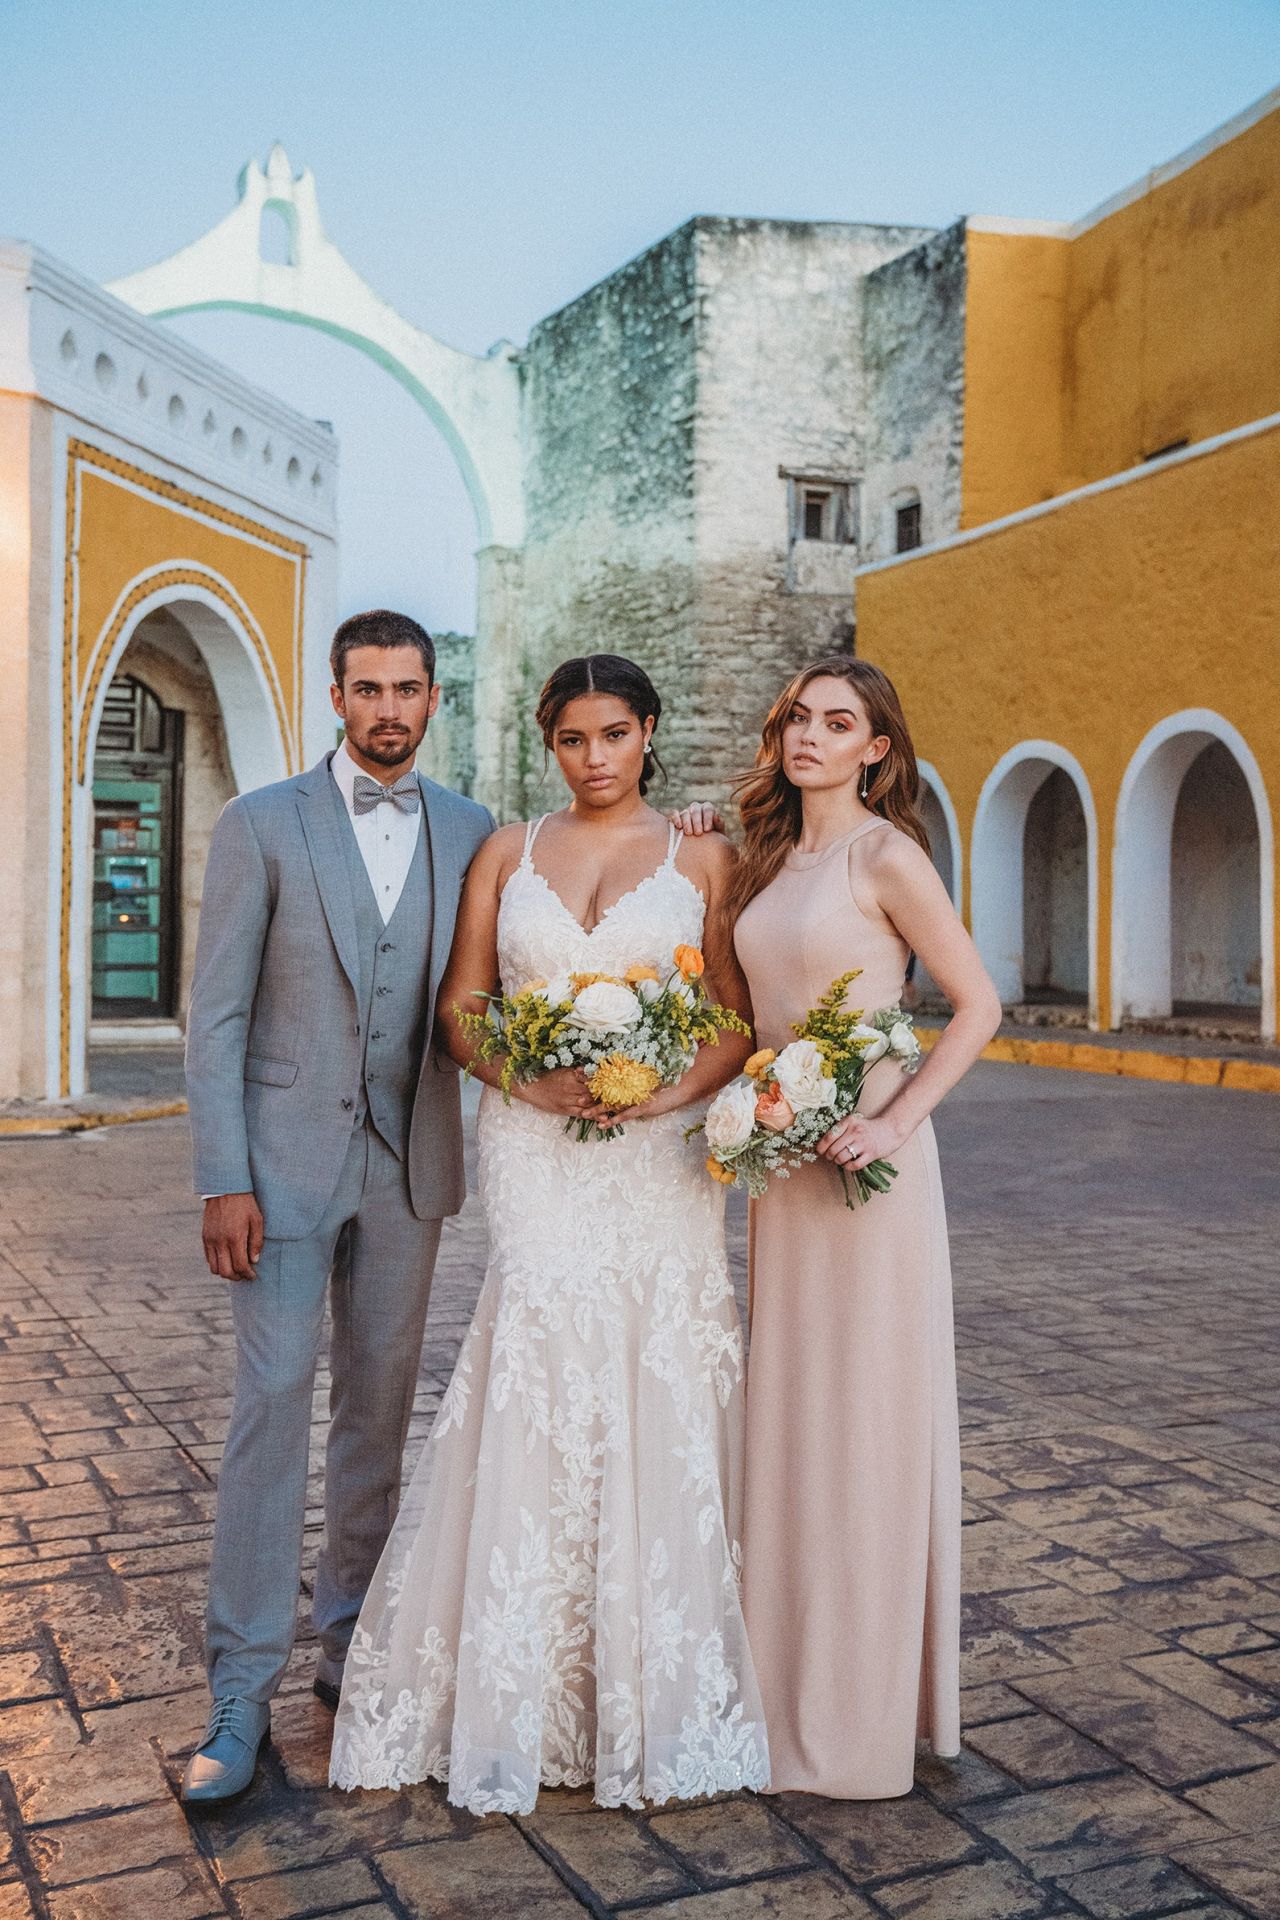 Bride wearing a lace wedding dress with groom in a grey suit and maid of honor in soft blush bridesmaid dress